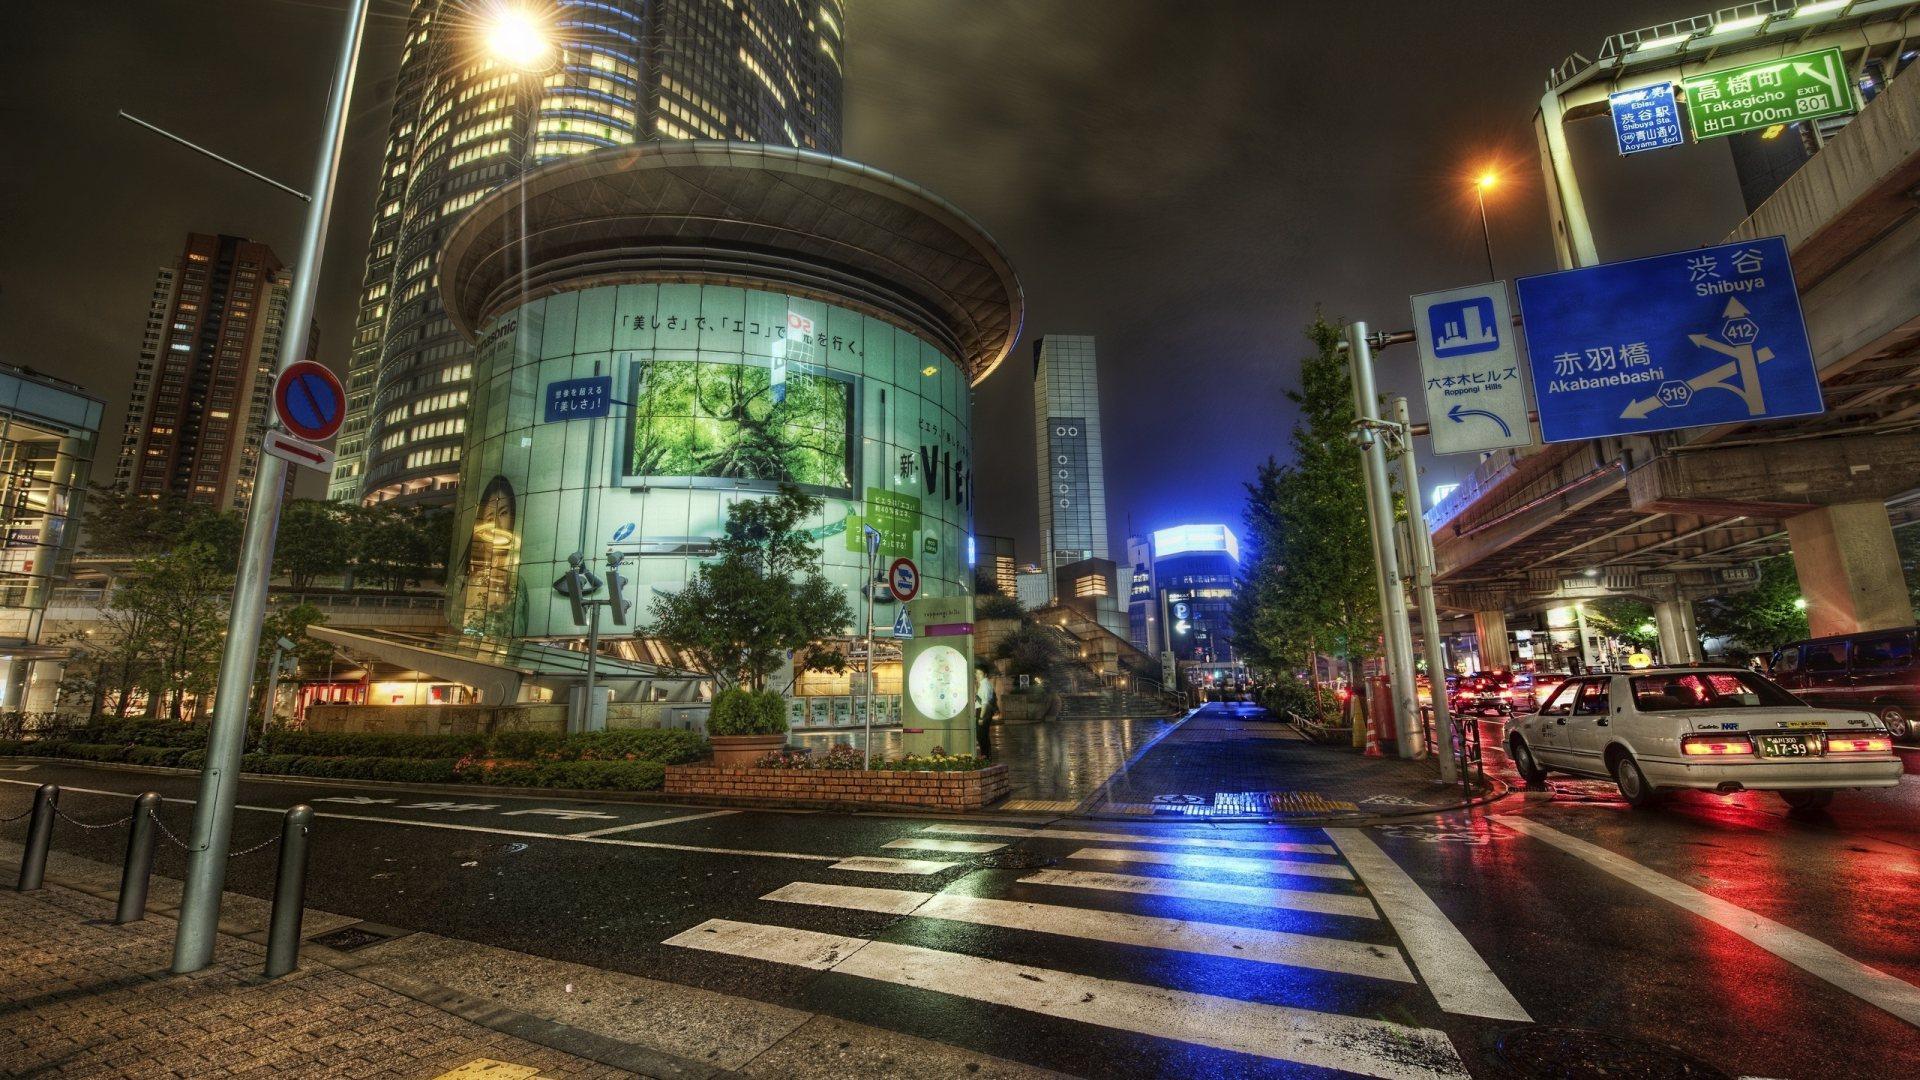 Street in Tokyo wallpaper and image, picture, photo